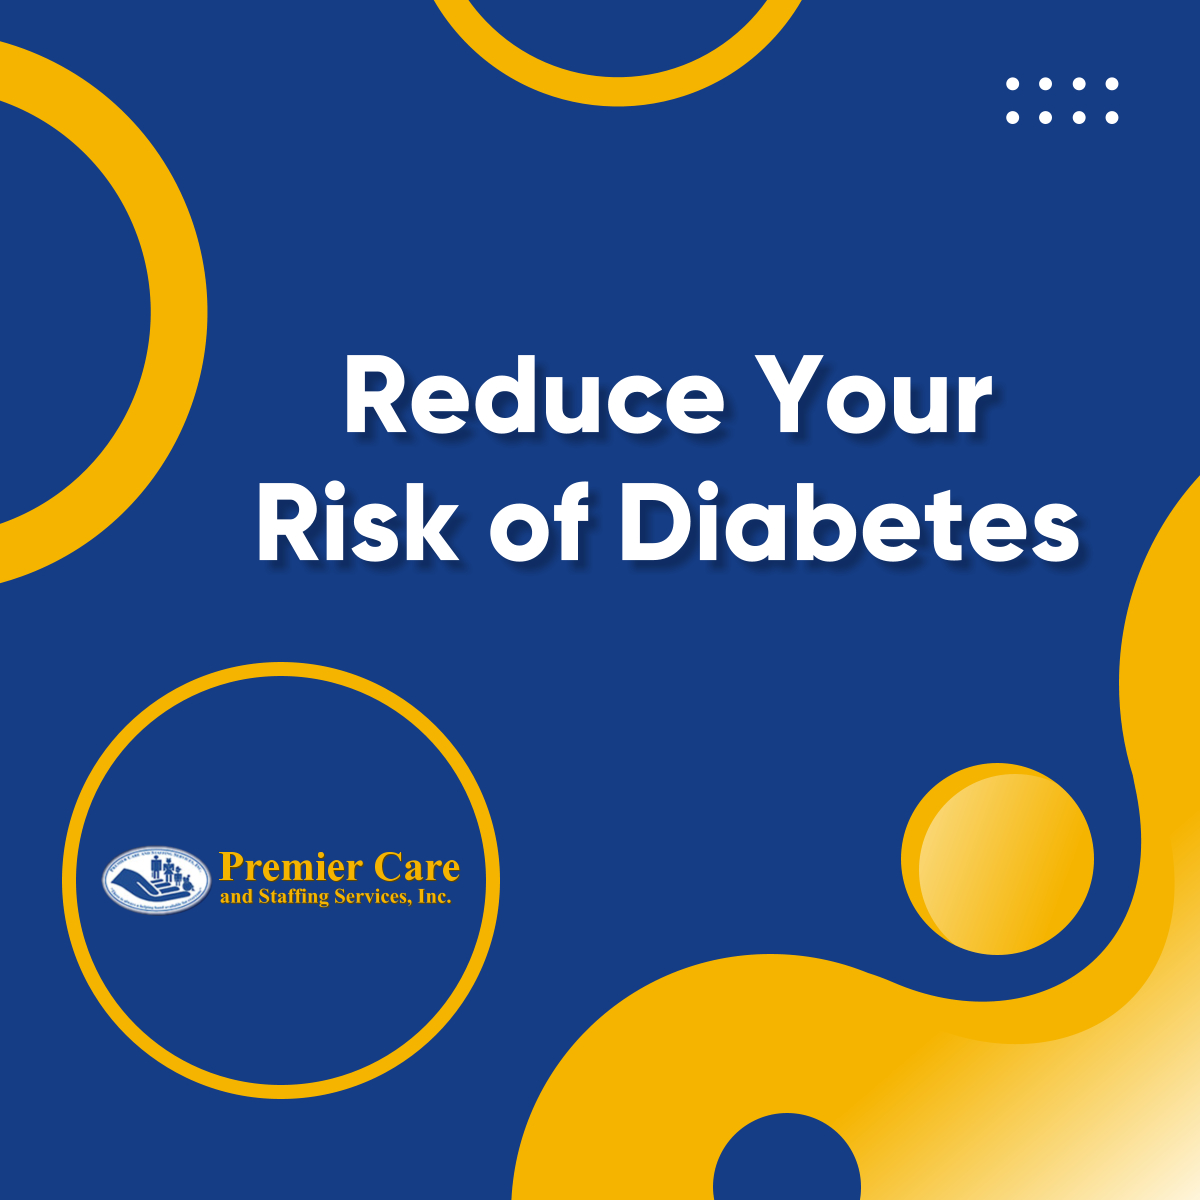 Losing excess weight is one of the most effective ways to lower your risk of diabetes. There are numerous ways to lose weight, some of which are healthier than others, such as exercising regularly and eating a well-balanced diet.

#Diabetes #UpperDarbyPA #HealthcareStaffing